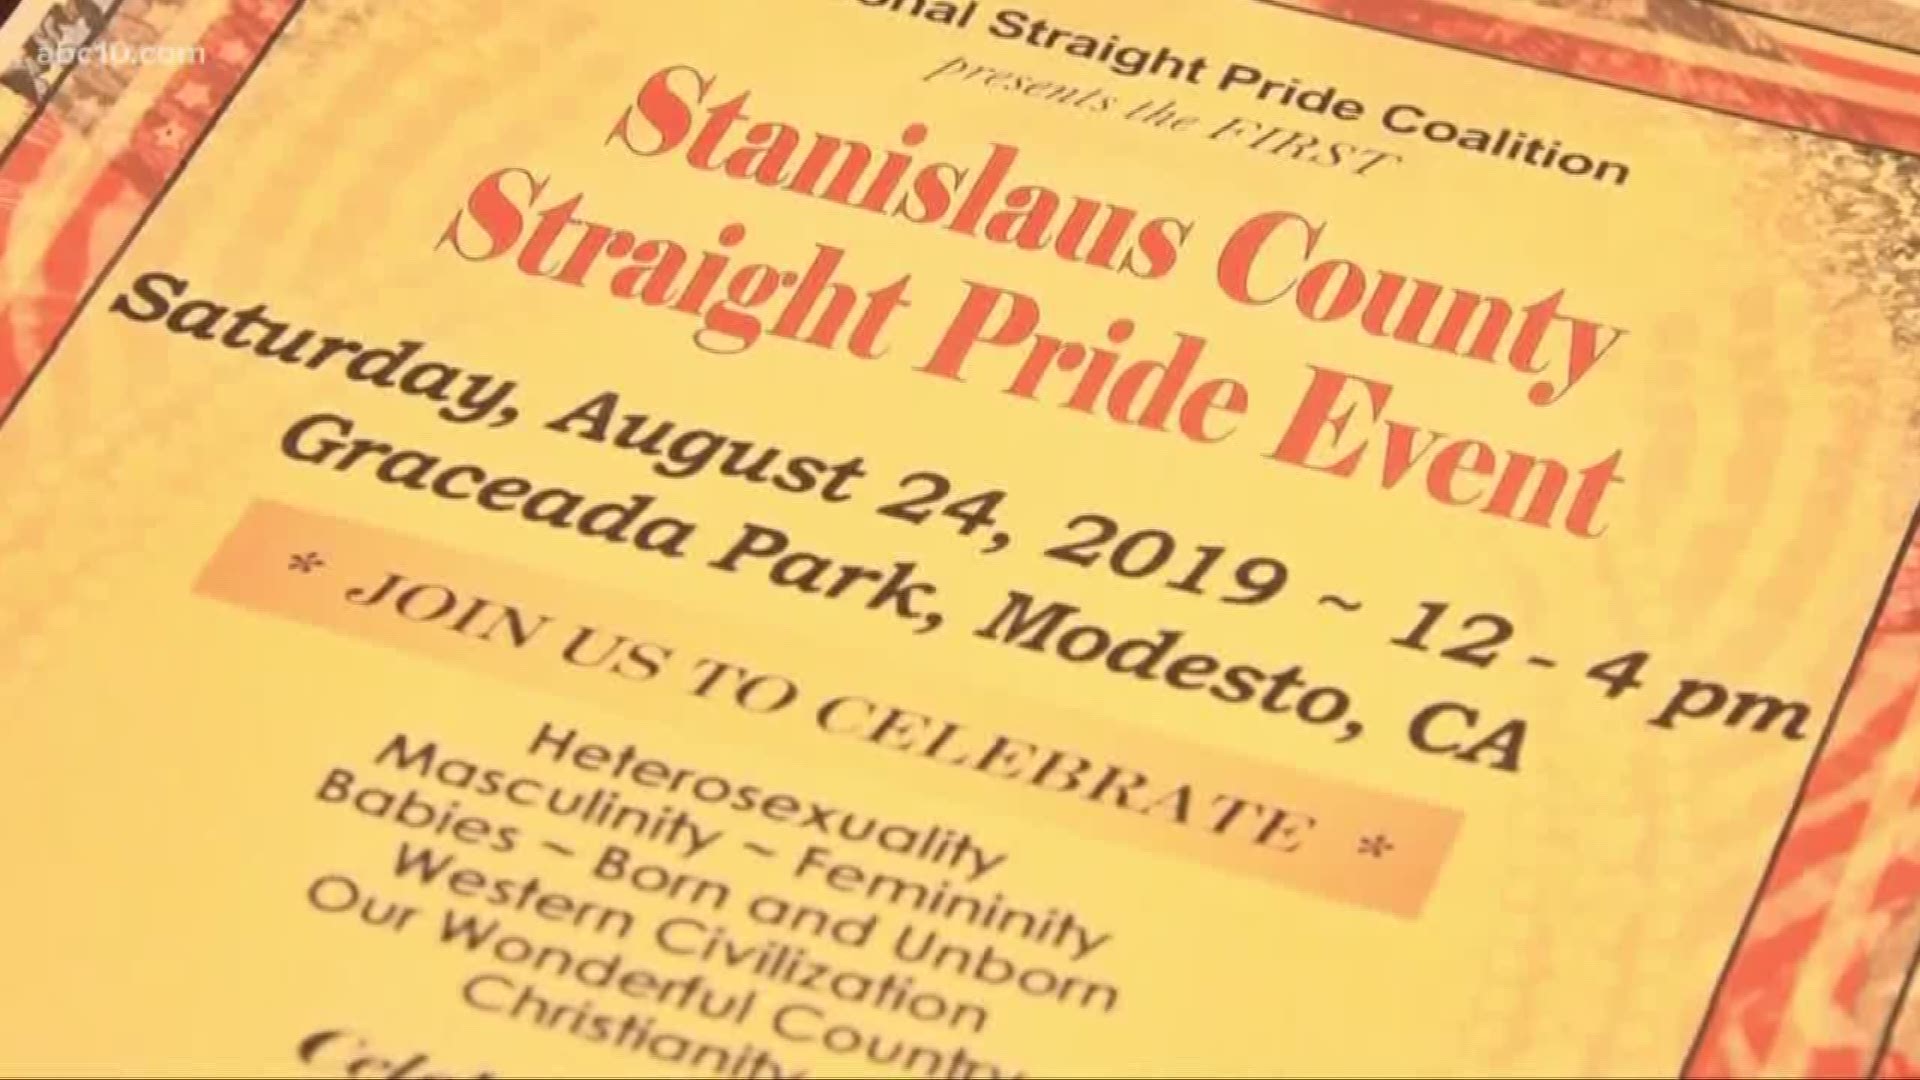 In response to the proposed "Straight Pride" event scheduled Saturday in Modesto, a number of events will be happening around town in counterprotest.